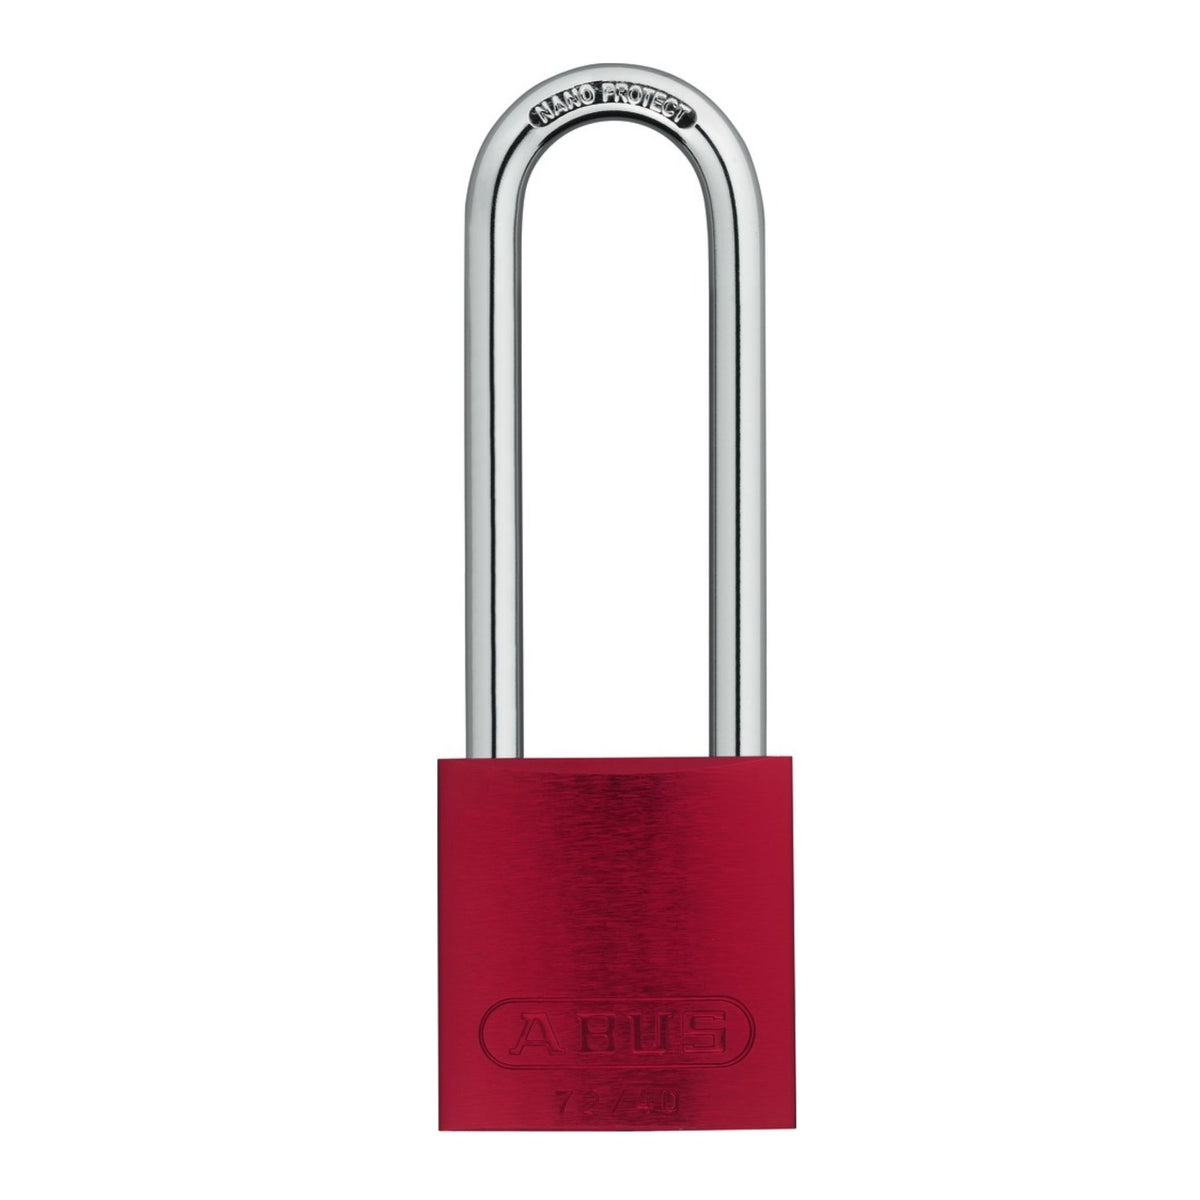 Abus 72/40HB75 KA Red Titalium Safety Padlock with 3-Inch Shackle - The Lock Source